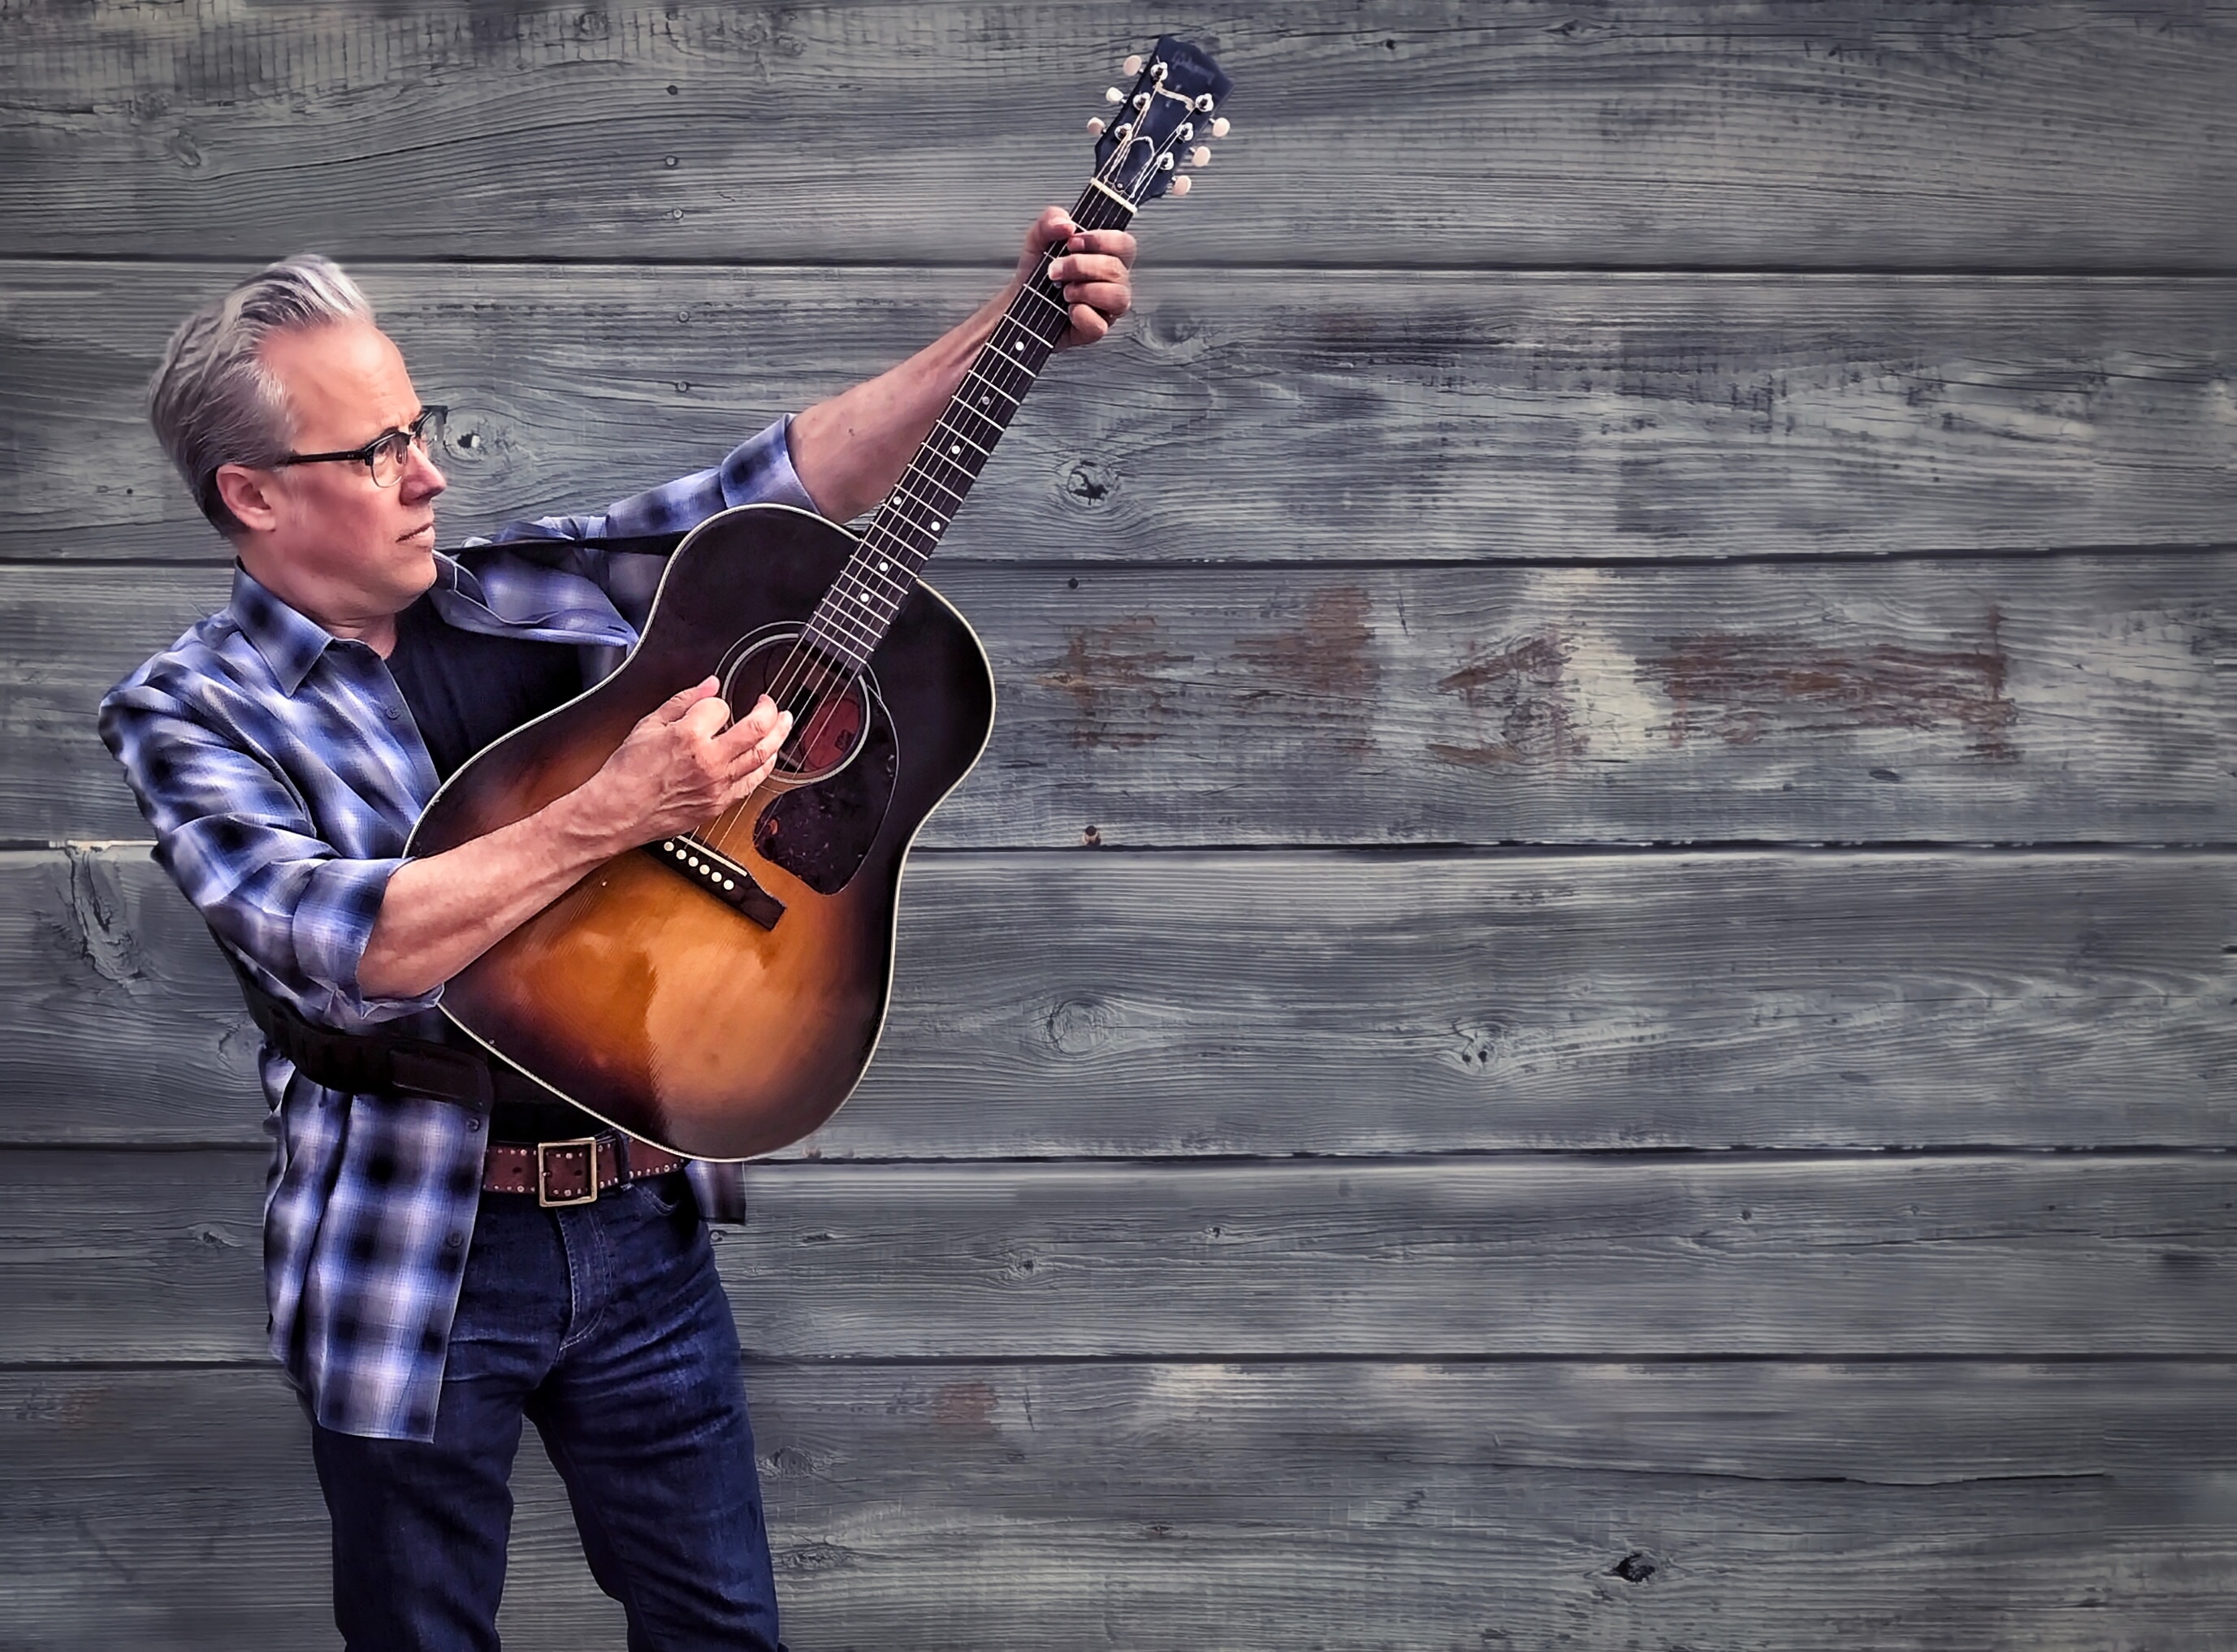 Radney Foster Shares New Track from Forthcoming Album/Book Project